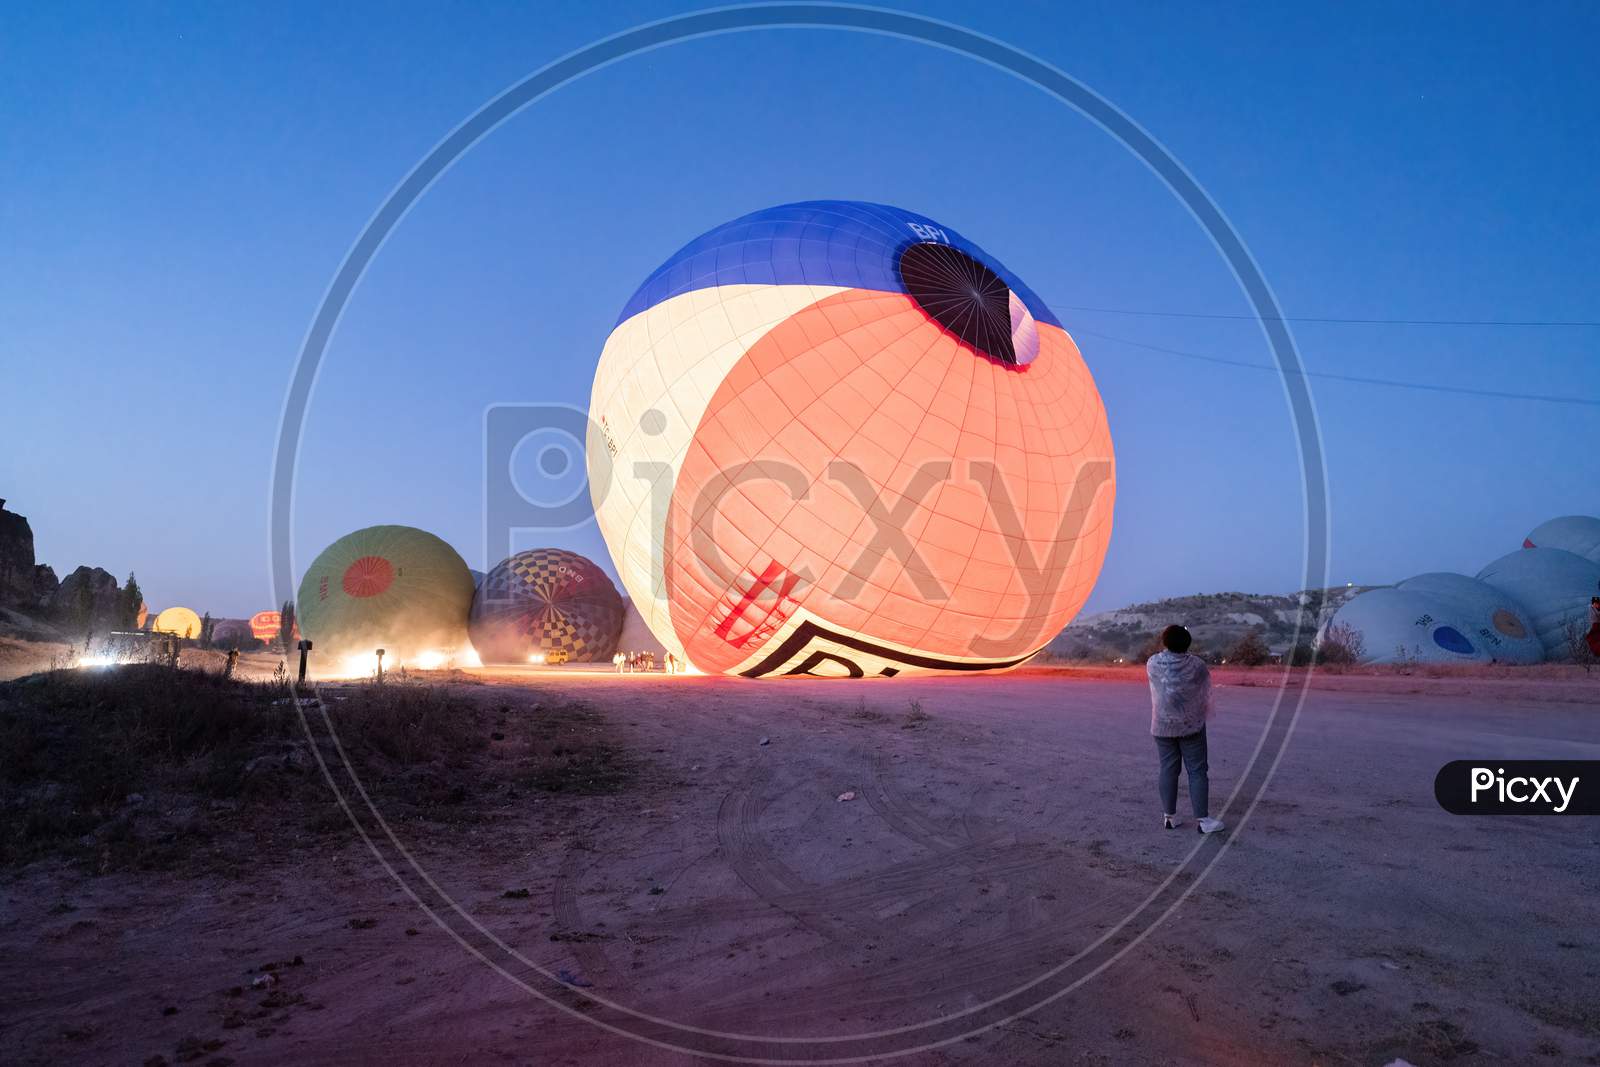 Cappadocia, Turkey - September 14, 2021: Air Hot Air Balloons Being Filled With Helium Gas During Night, Preparation Of A Flight In Goreme National Park In Cappadocia, Turkey